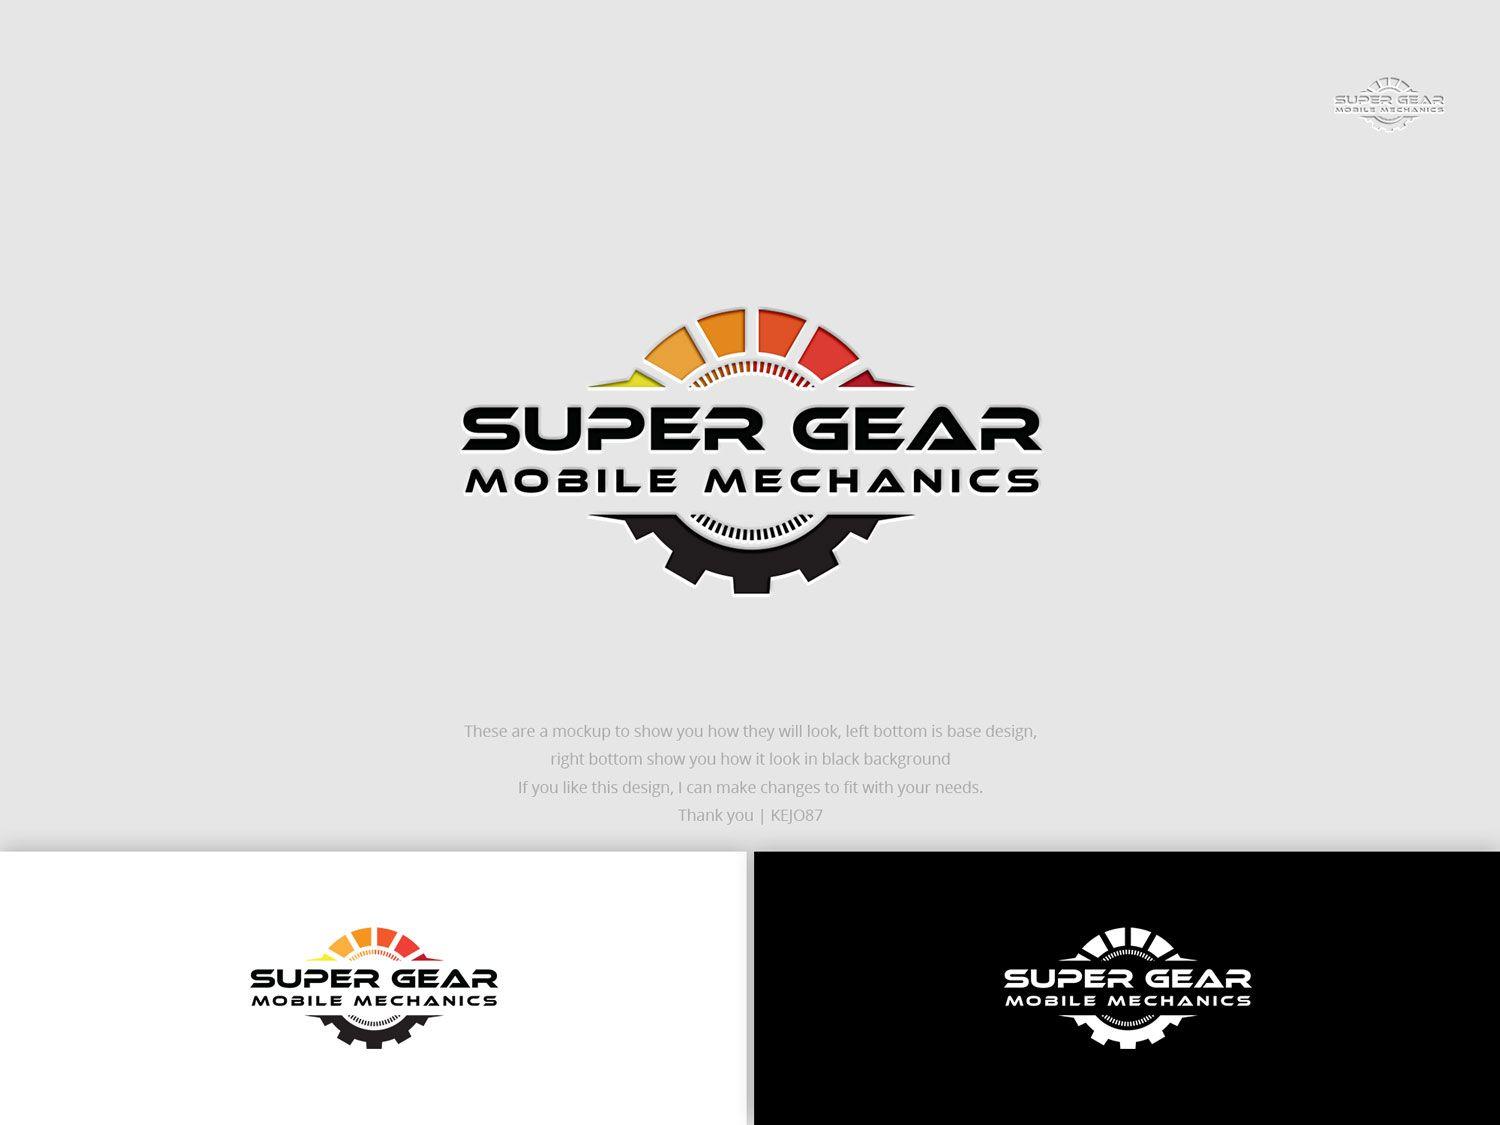 Your Mobile Mechanic Logo - Serious, Professional, It Company Logo Design for Super Gear Mobile ...